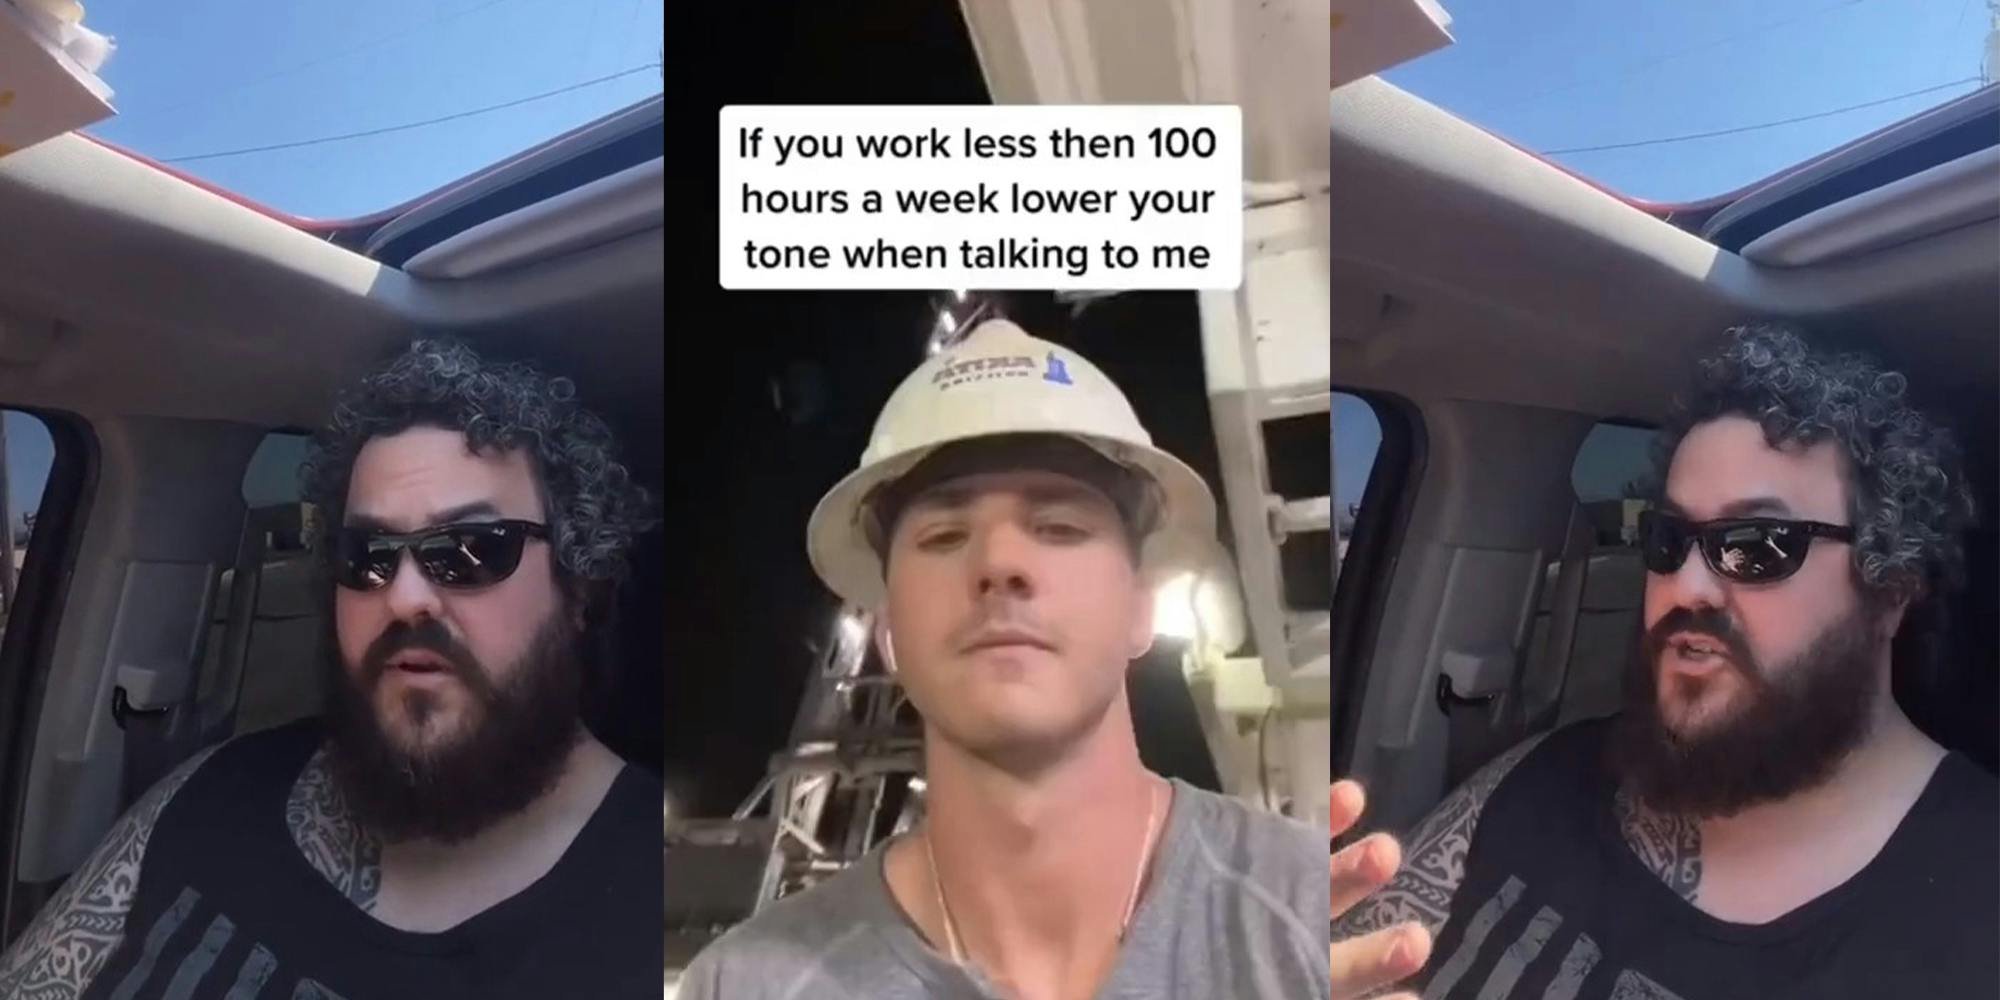 ‘if you work less than 100 hours a week lower your tone when talking to me’: Worker brags about how dedicated he is to his job. It backfires spectacularly